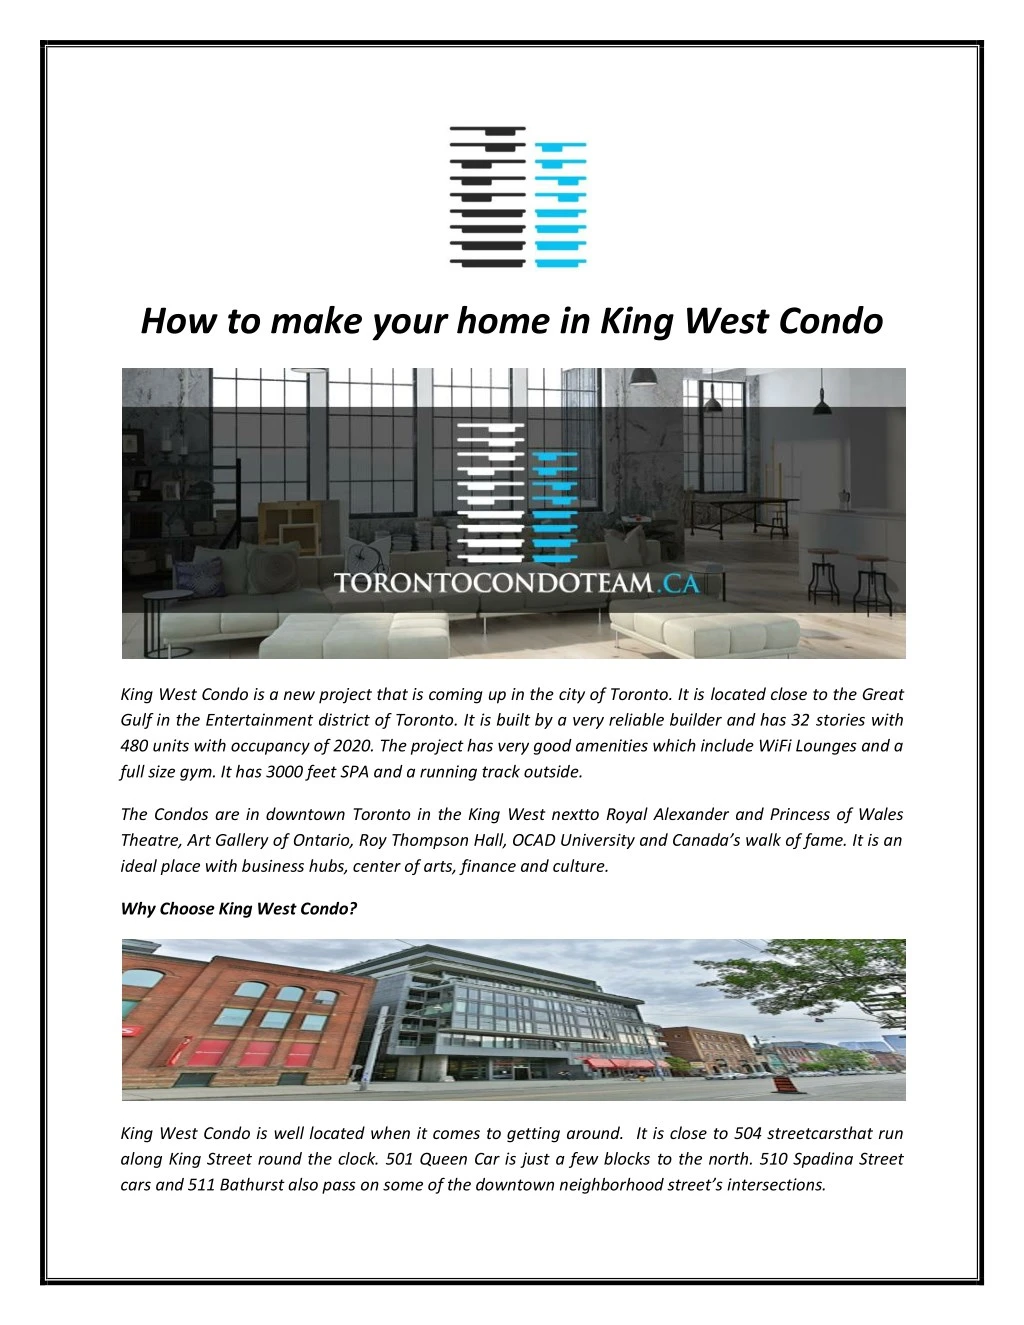 how to make your home in king west condo